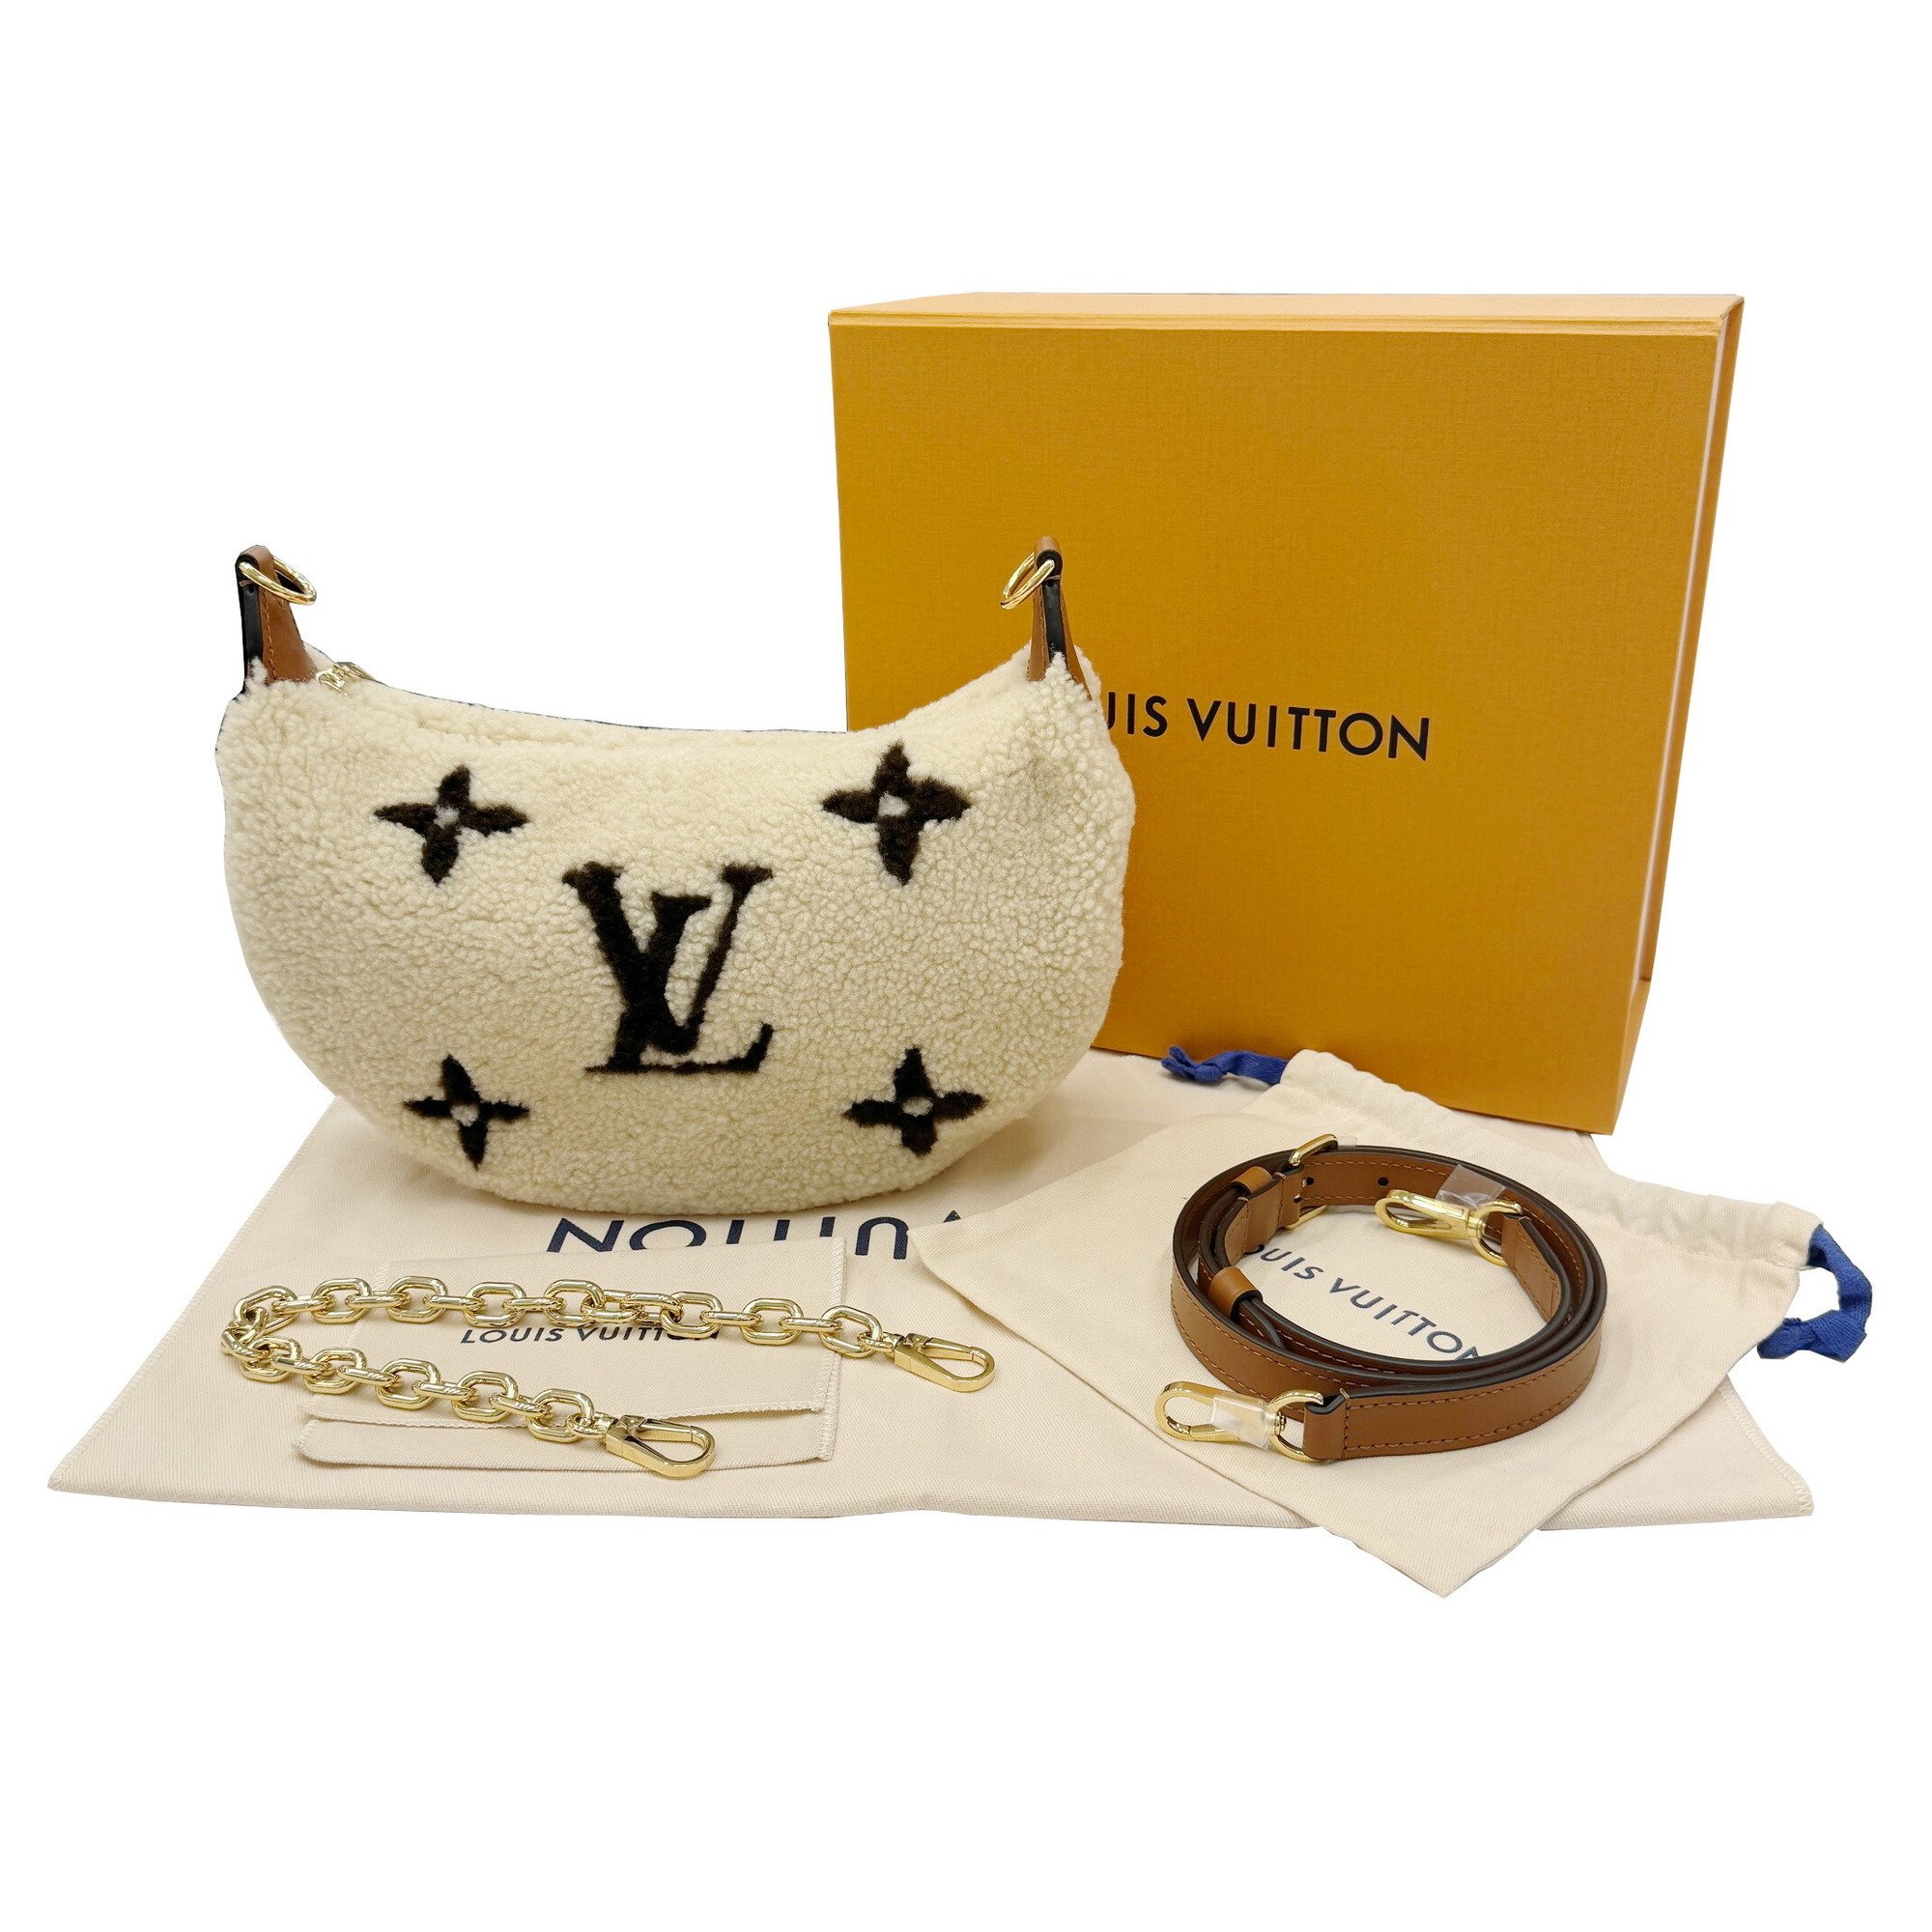 LOUIS VUITTON LV SKI Over the Moon M23321 RFID IC Chip New Current Monogram Giant Ladies Chain Bag Shoulder Half Shearling Mouton